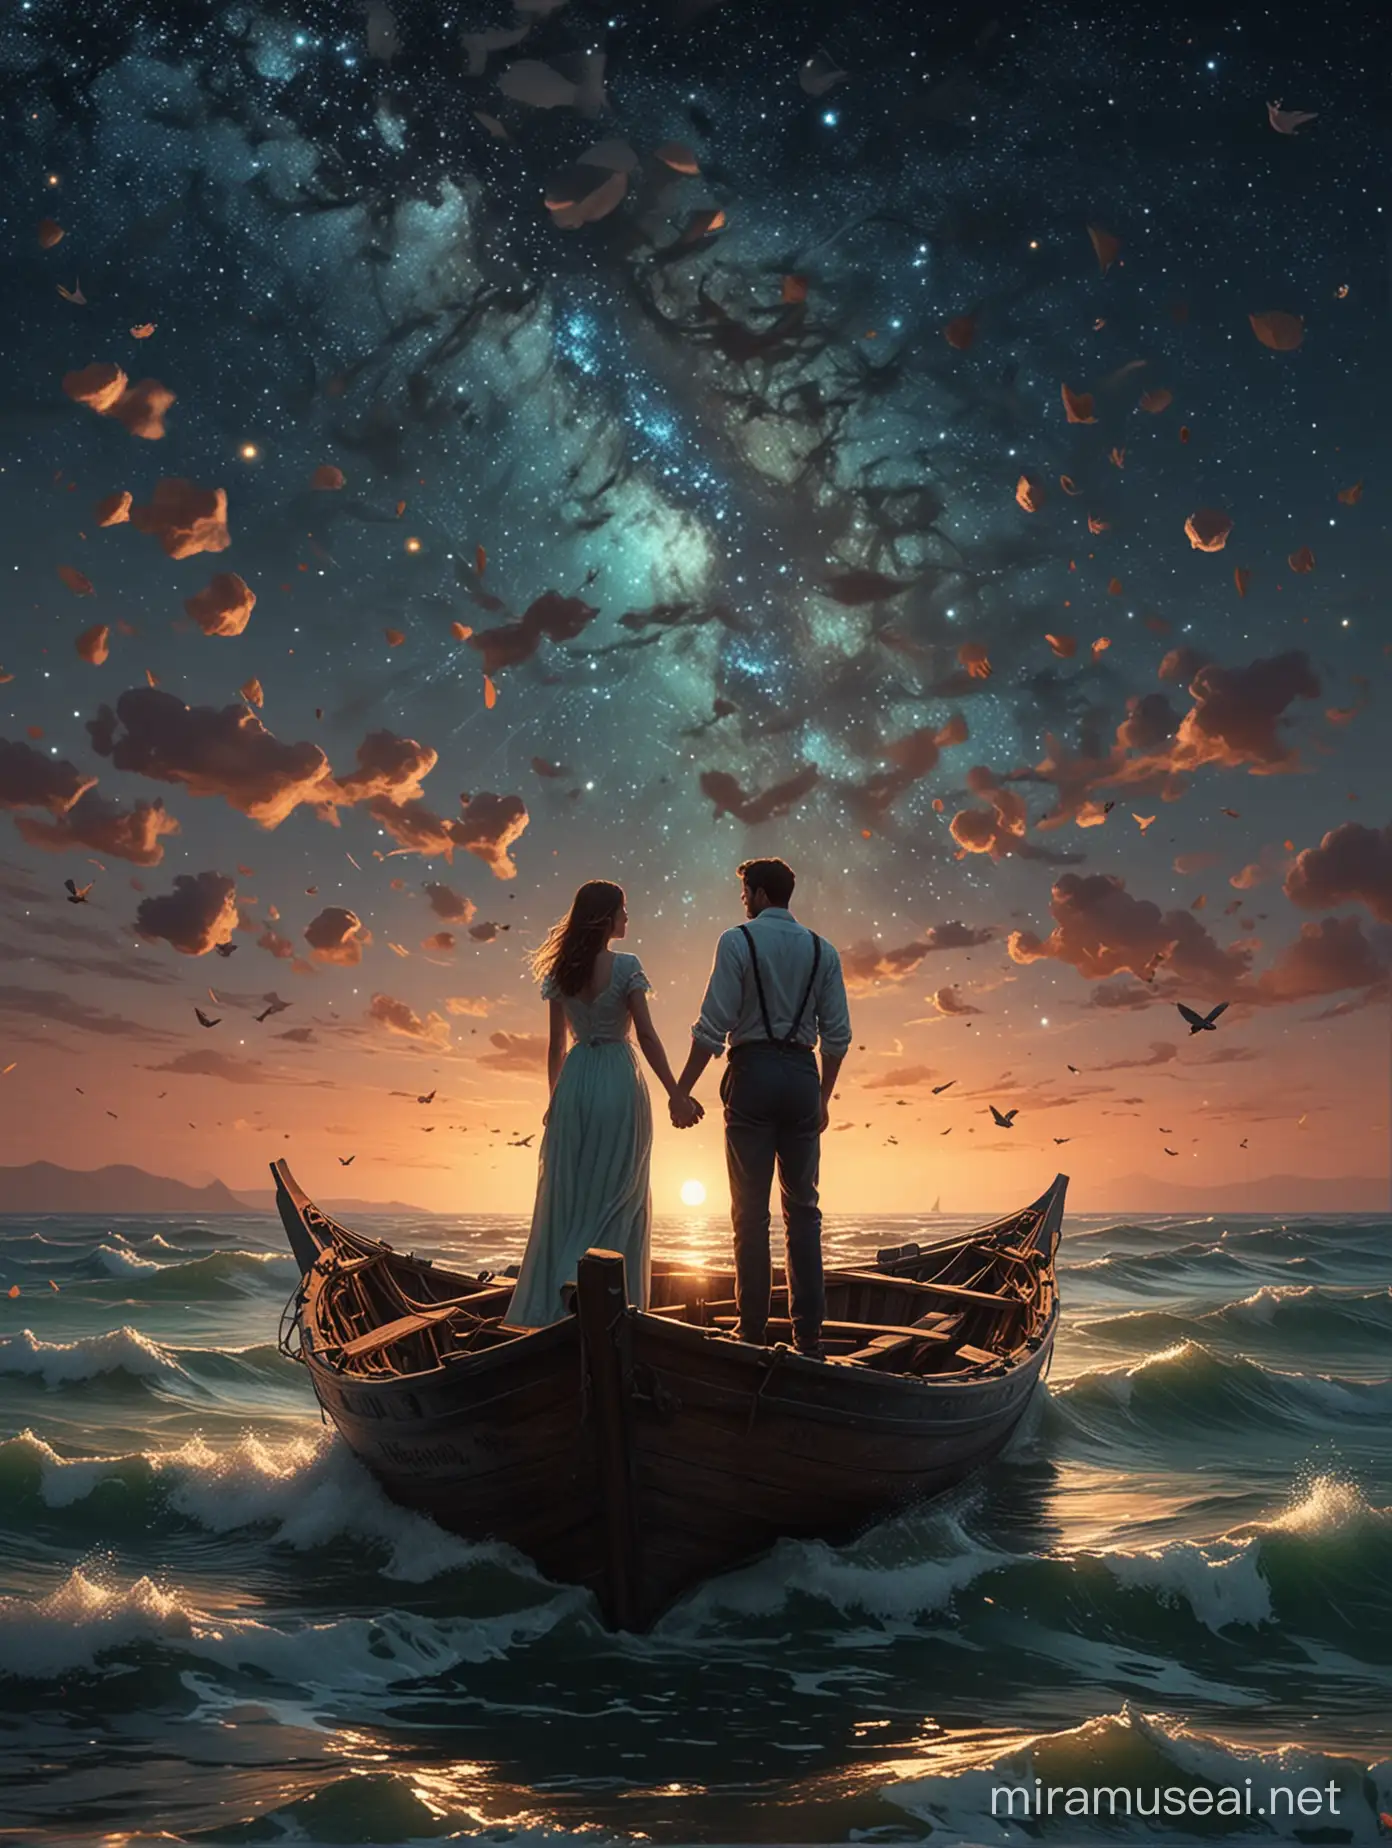 "Love Under the Stars: This art poster unfolds an eternal story of love and destiny.  In the soft light of the starry sky, similar to the paintings of Van Gogh,   stand on board the ship, hand in hand, side by side, like two bright points in the ocean of time, their gazes intertwined like stars on the canvas of the night sky.  Raising their hands to the sky, they seem to live in their own little fairy tale, despite the sorrow and danger.  Tenderness, passion, romance and tragedy merge in this picture, forcing the viewer to forget about time and plunge into the world of their love.Digital painting, low poly, soft lighting, bird's eye view, isometric style, retro aesthetic, character oriented, 4K resolution, photorealistic rendering, using Cinema 4D